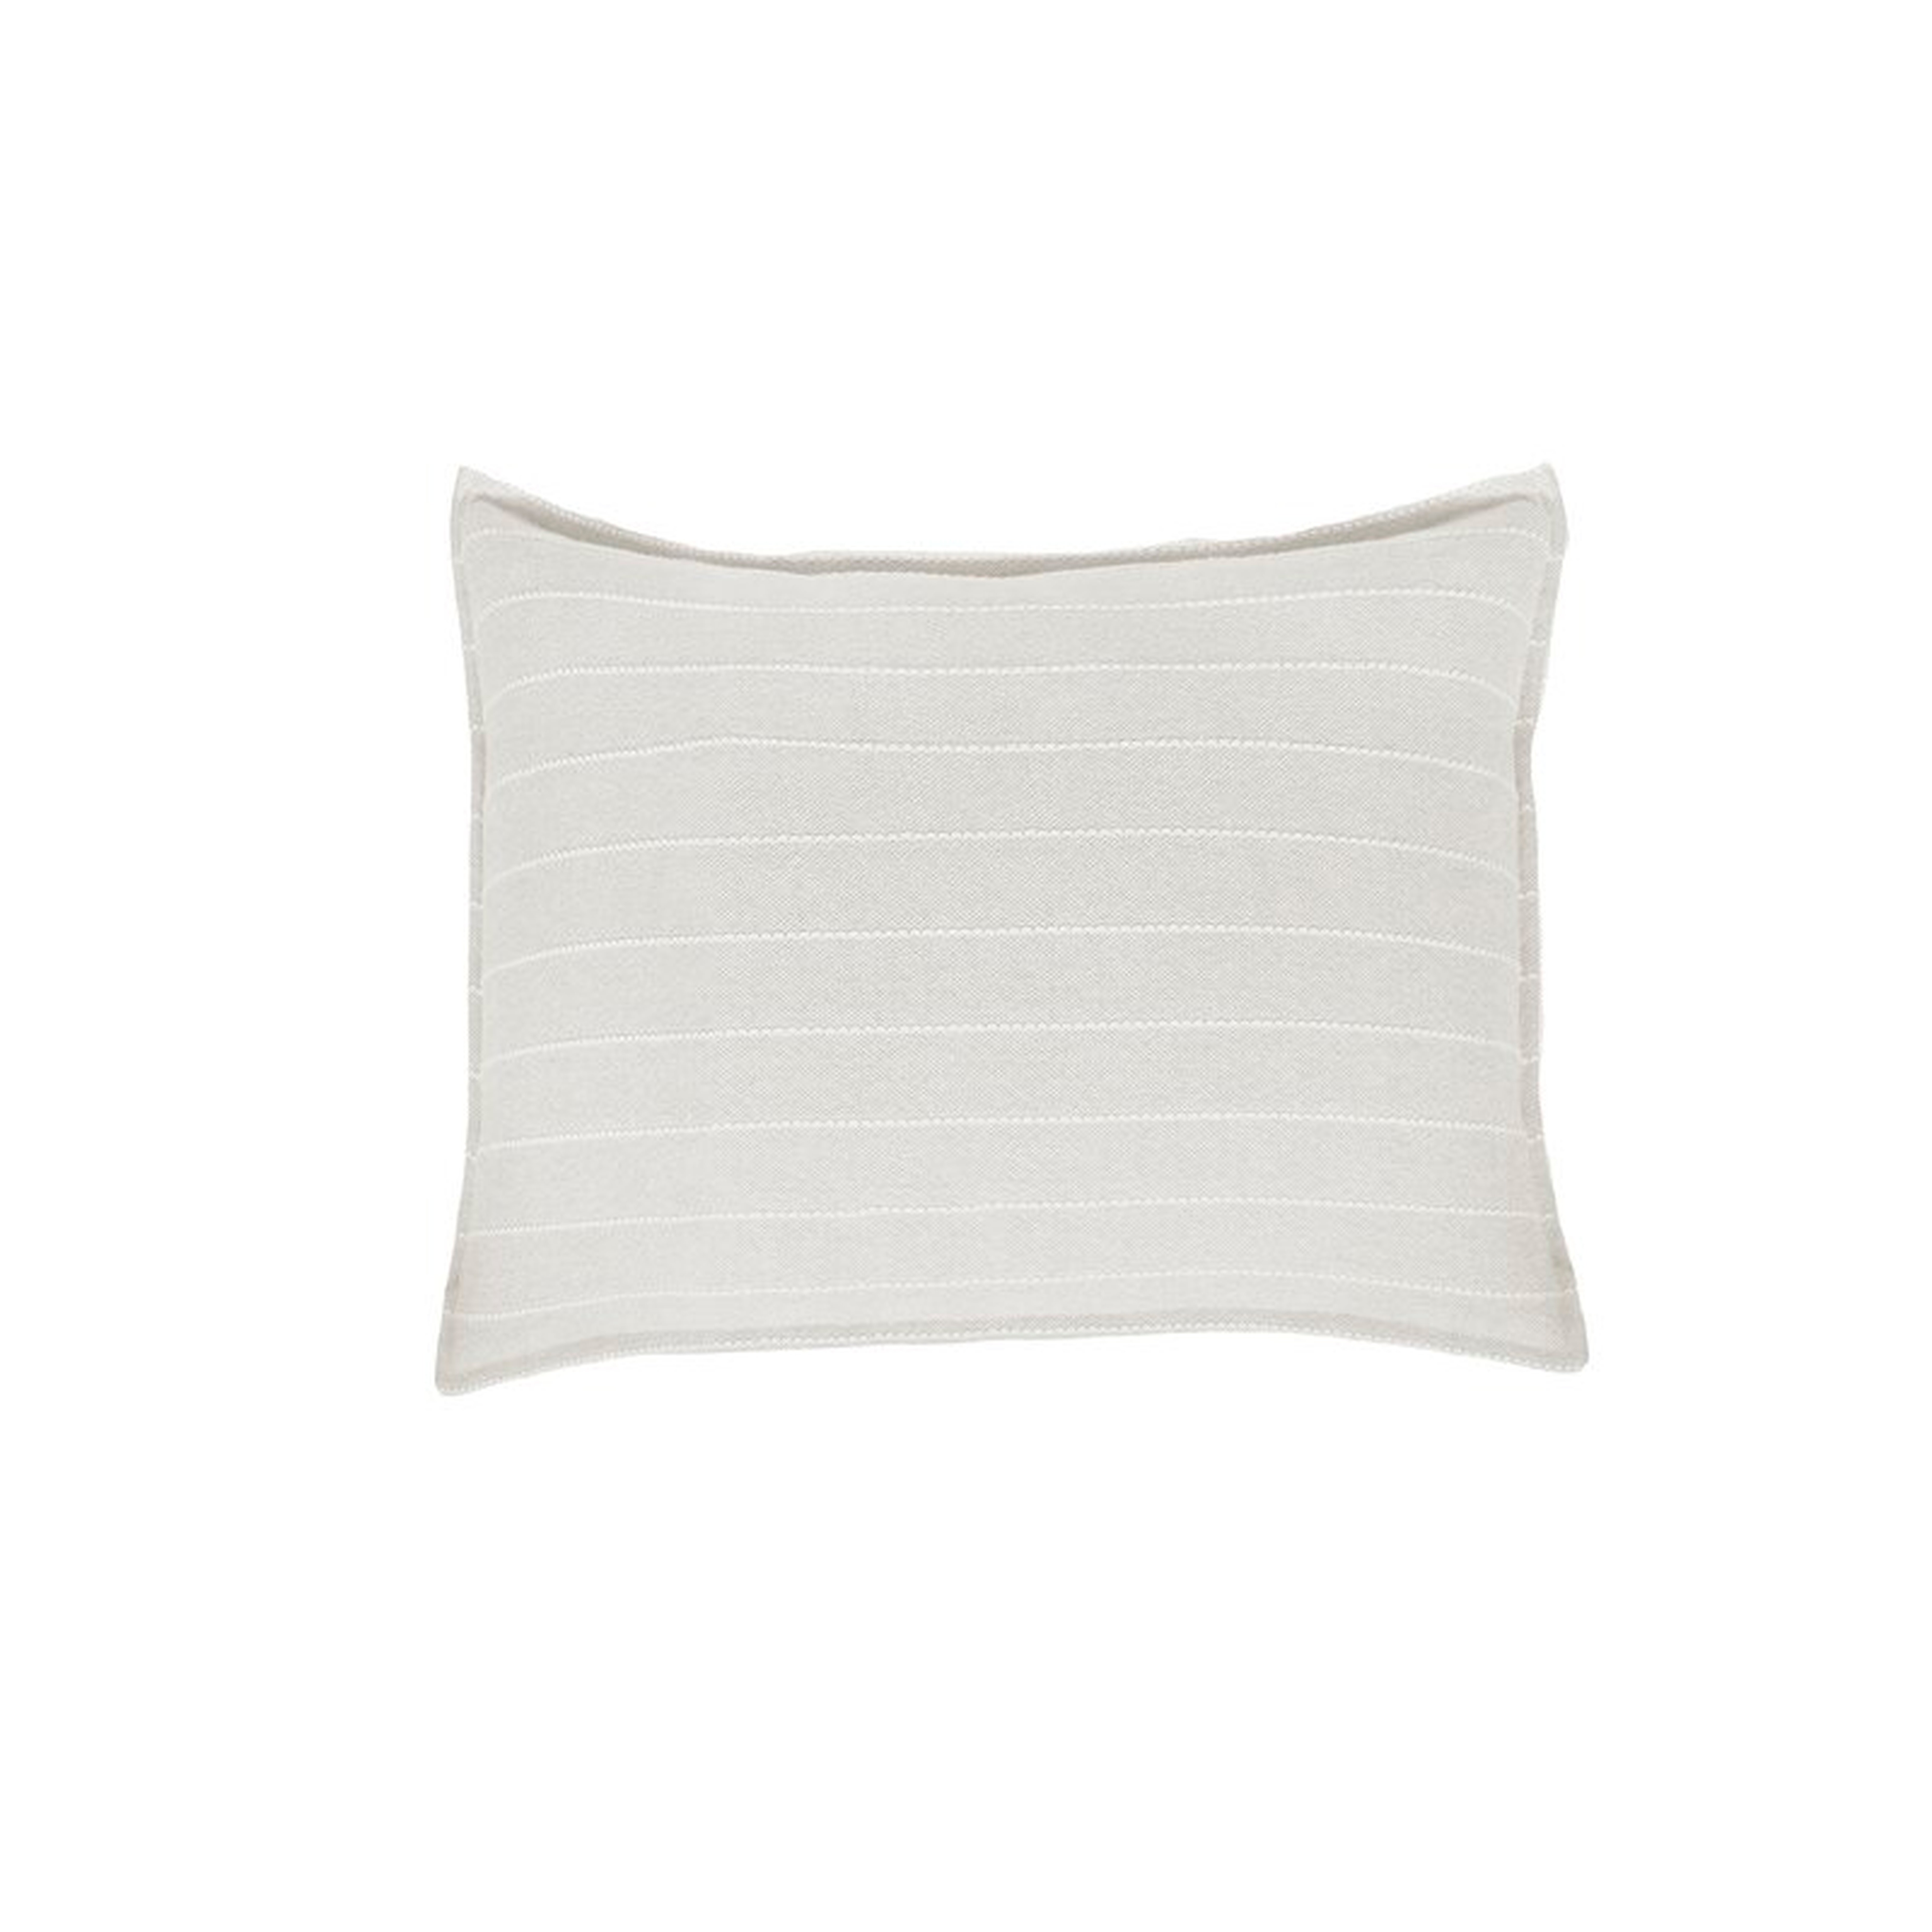 Pom Pom At Home Henley Cotton Feathers Striped Lumbar Pillow Color: Oat - Perigold